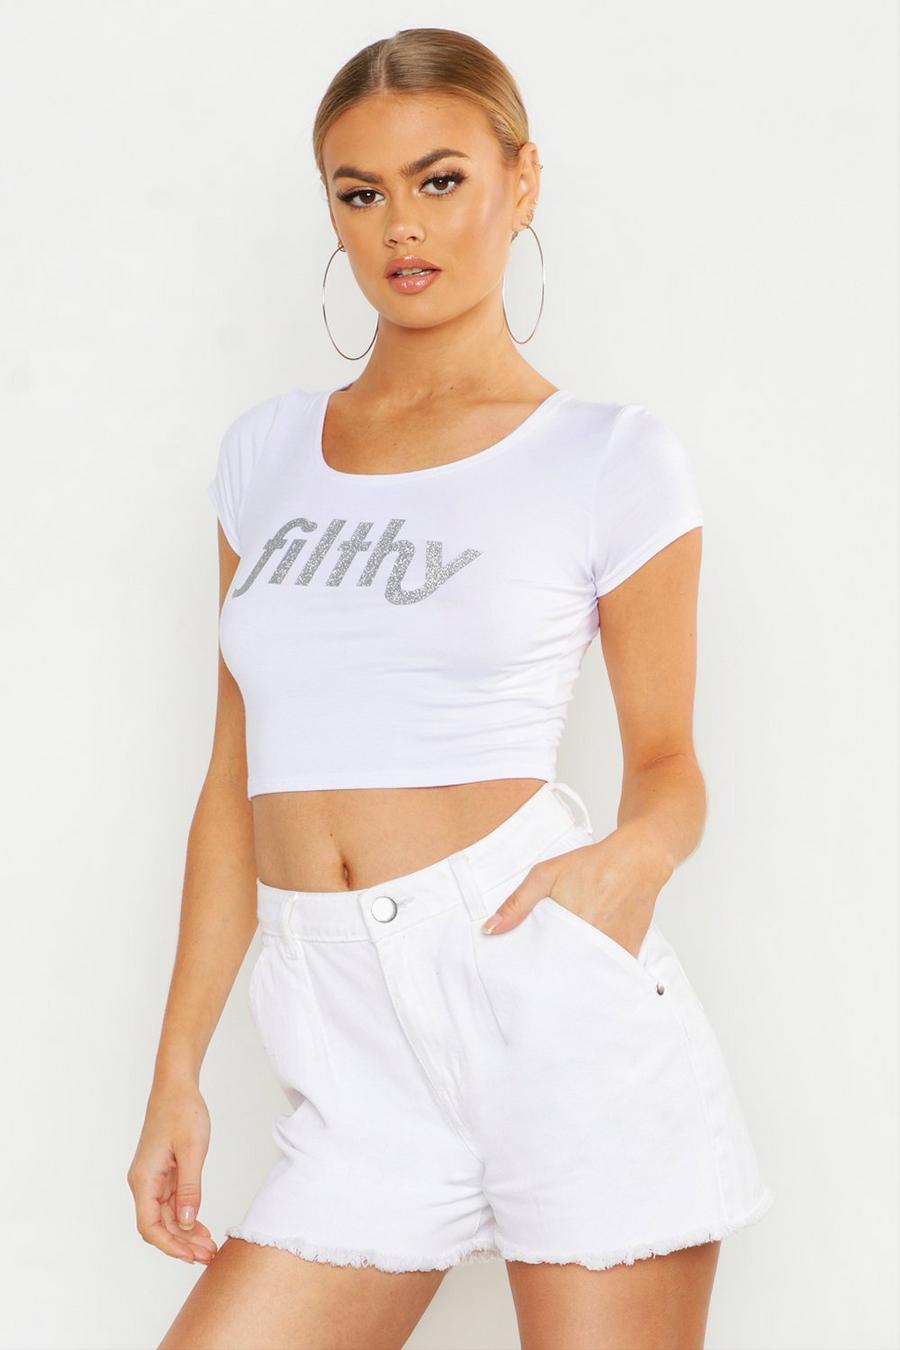 Filthy Silver Glitter Printed Crop Top image number 1